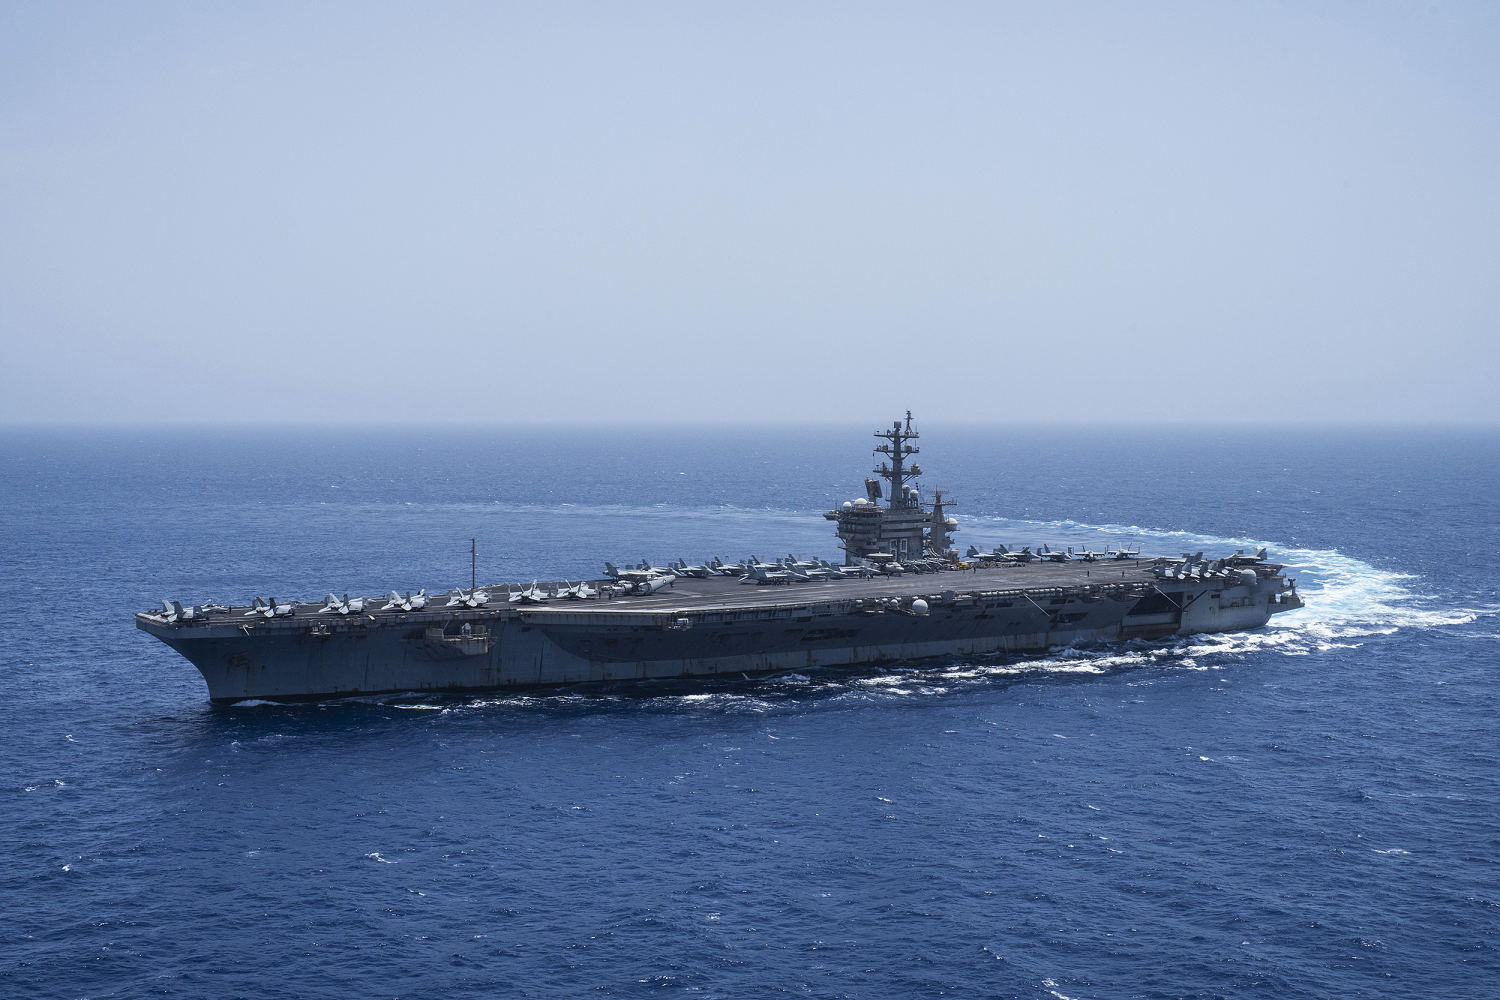 Ship attacked in Red Sea as USS Eisenhower heads home